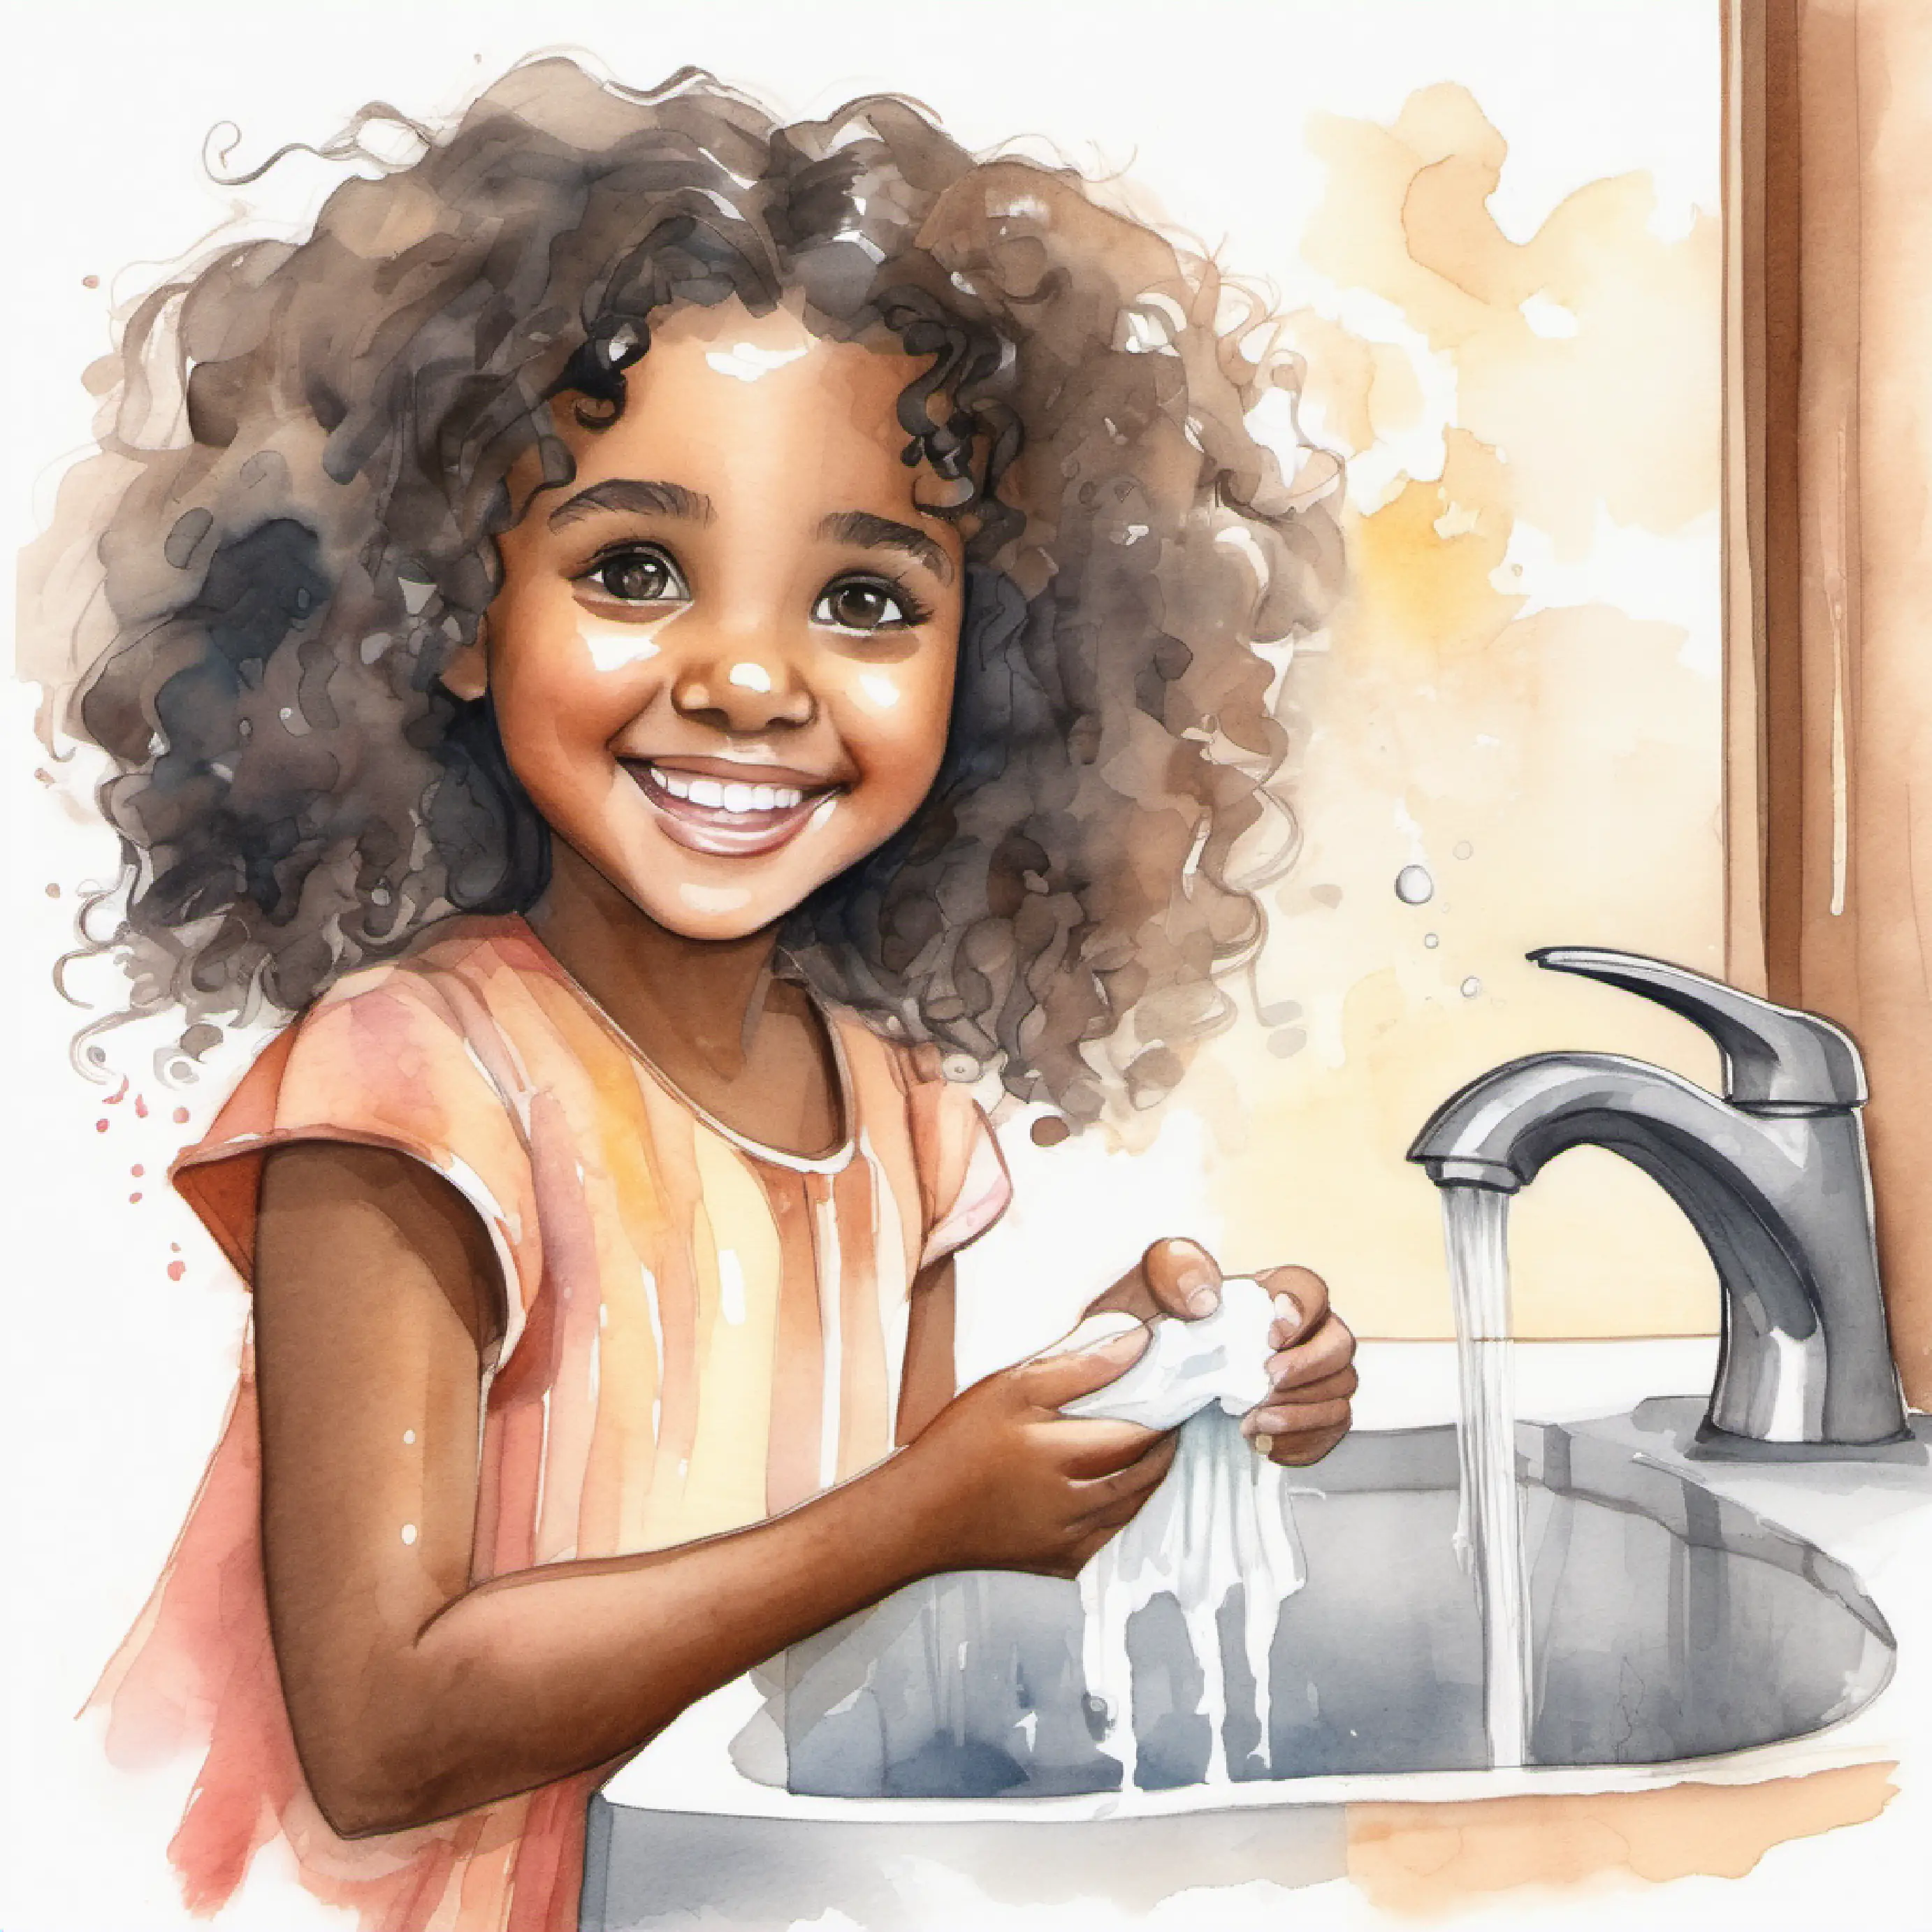 Cheerful girl, brown skin, curly black hair, big brown eyes washing hands with soap too late.